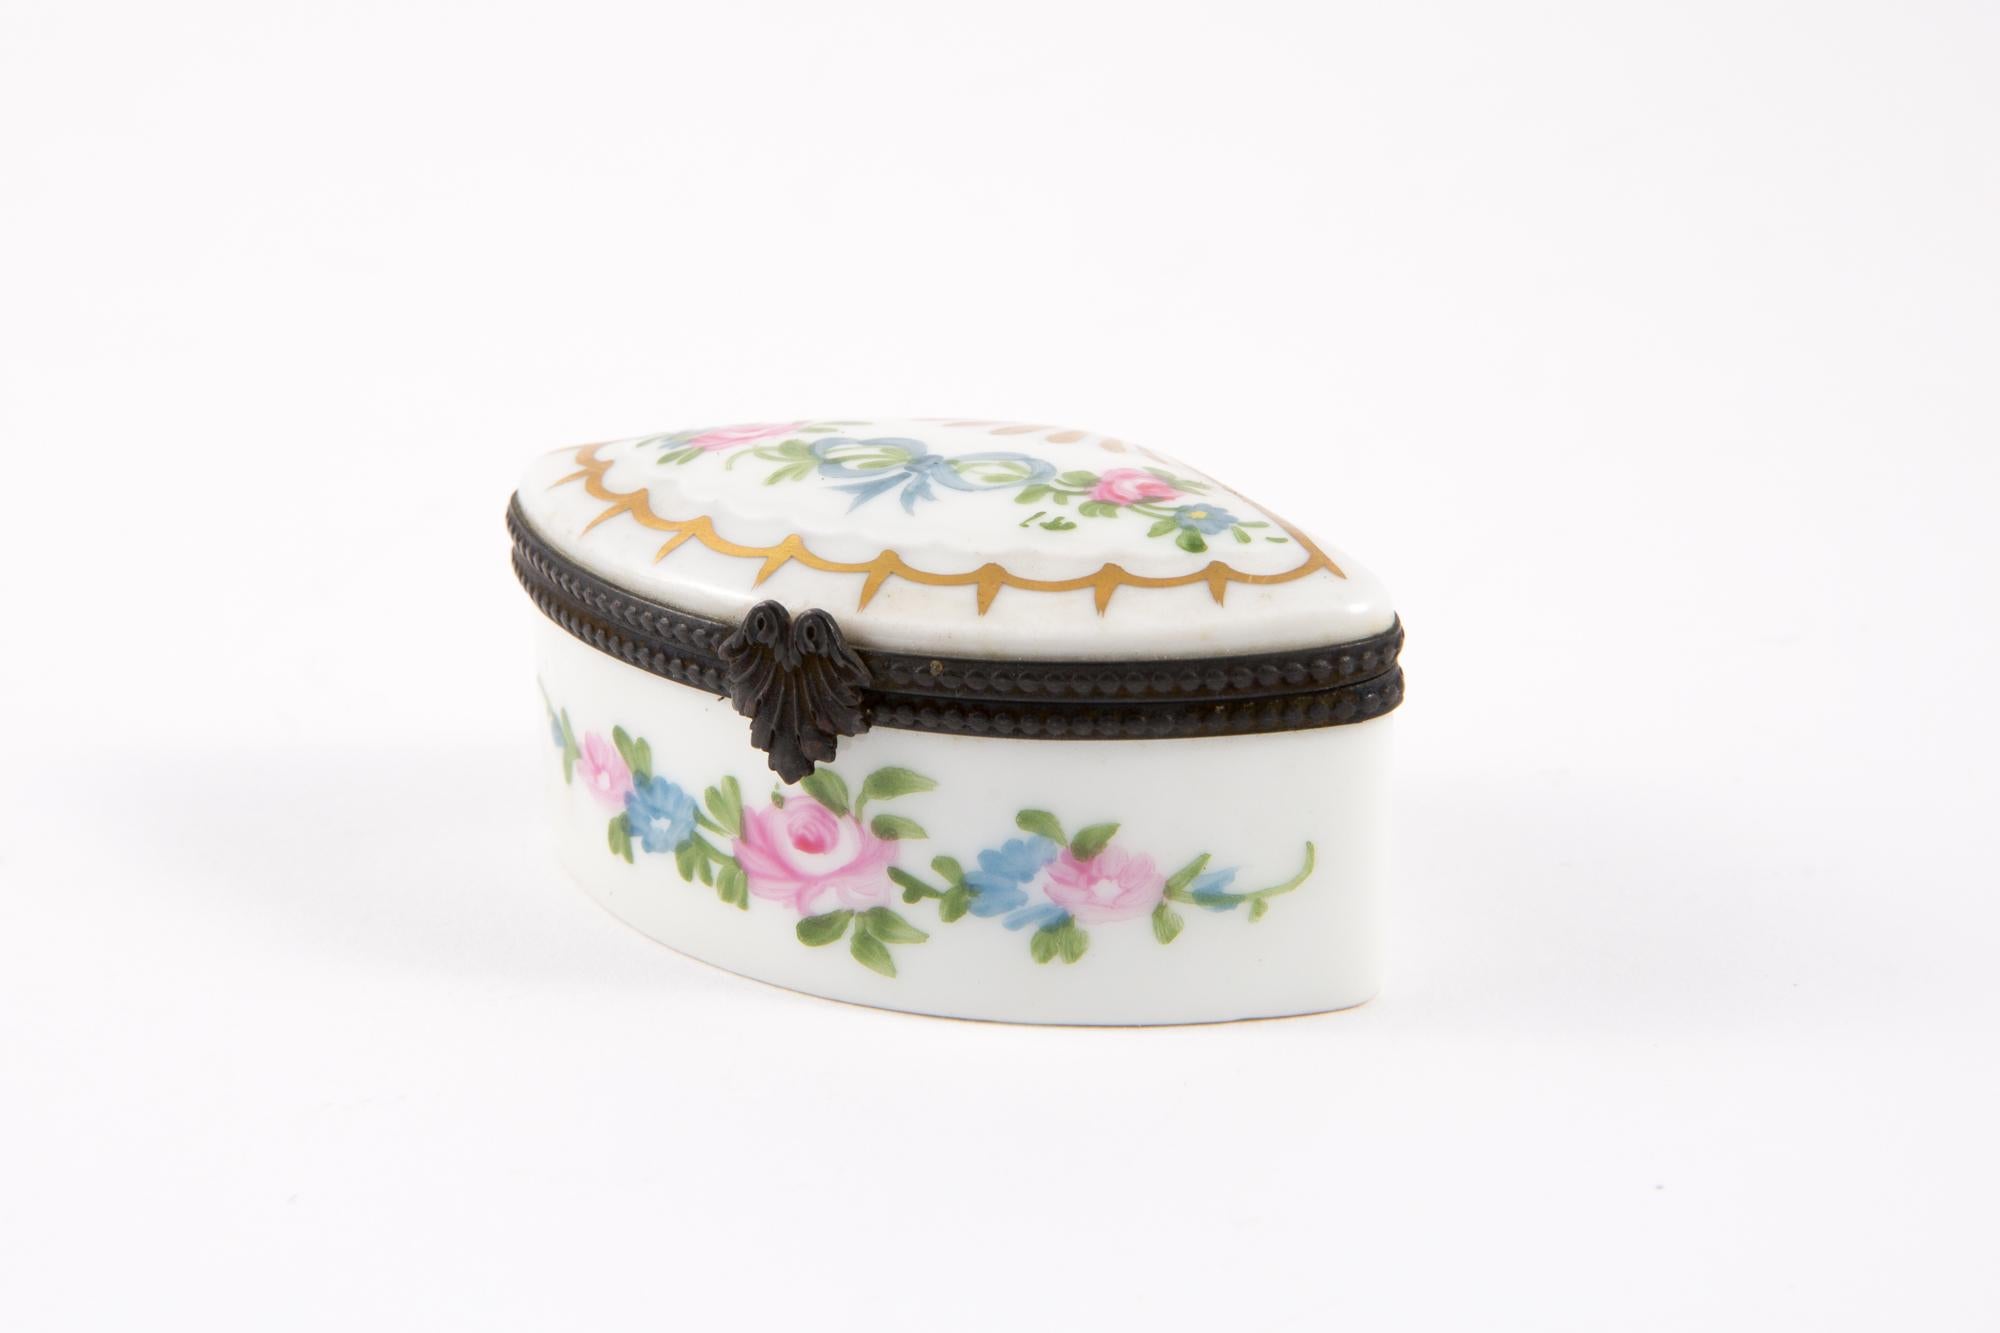 Porcelain pill or medicine box featuring a triangle shape, a black metal frame decorated with multicolour flowers painted on top, a tarnish tie claps opening. 
In good vintage condition. Made in France. 
Length 2.7in (7cm)
Height 1.7in. (4,5cm) 